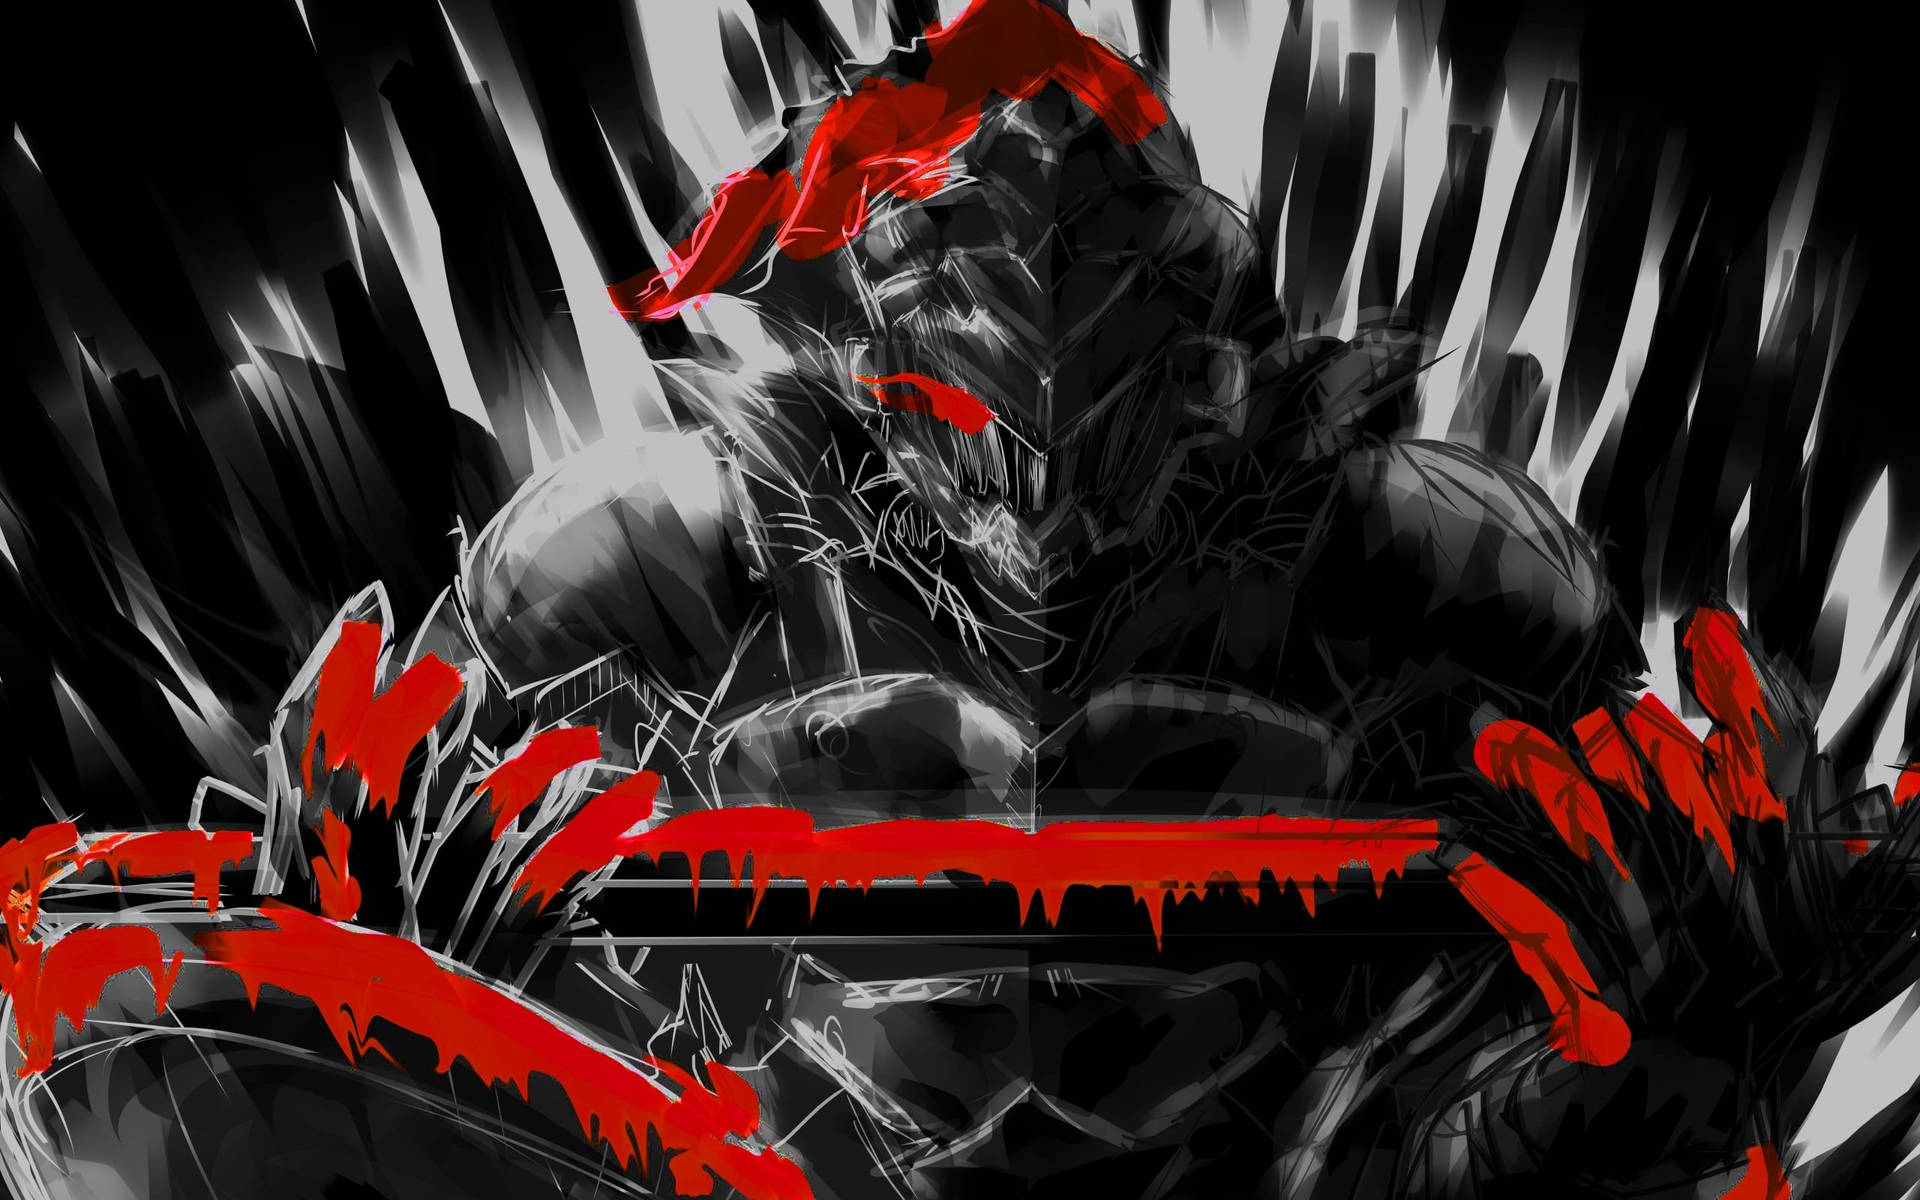 “goblin Slayer Fights For Justice” Background